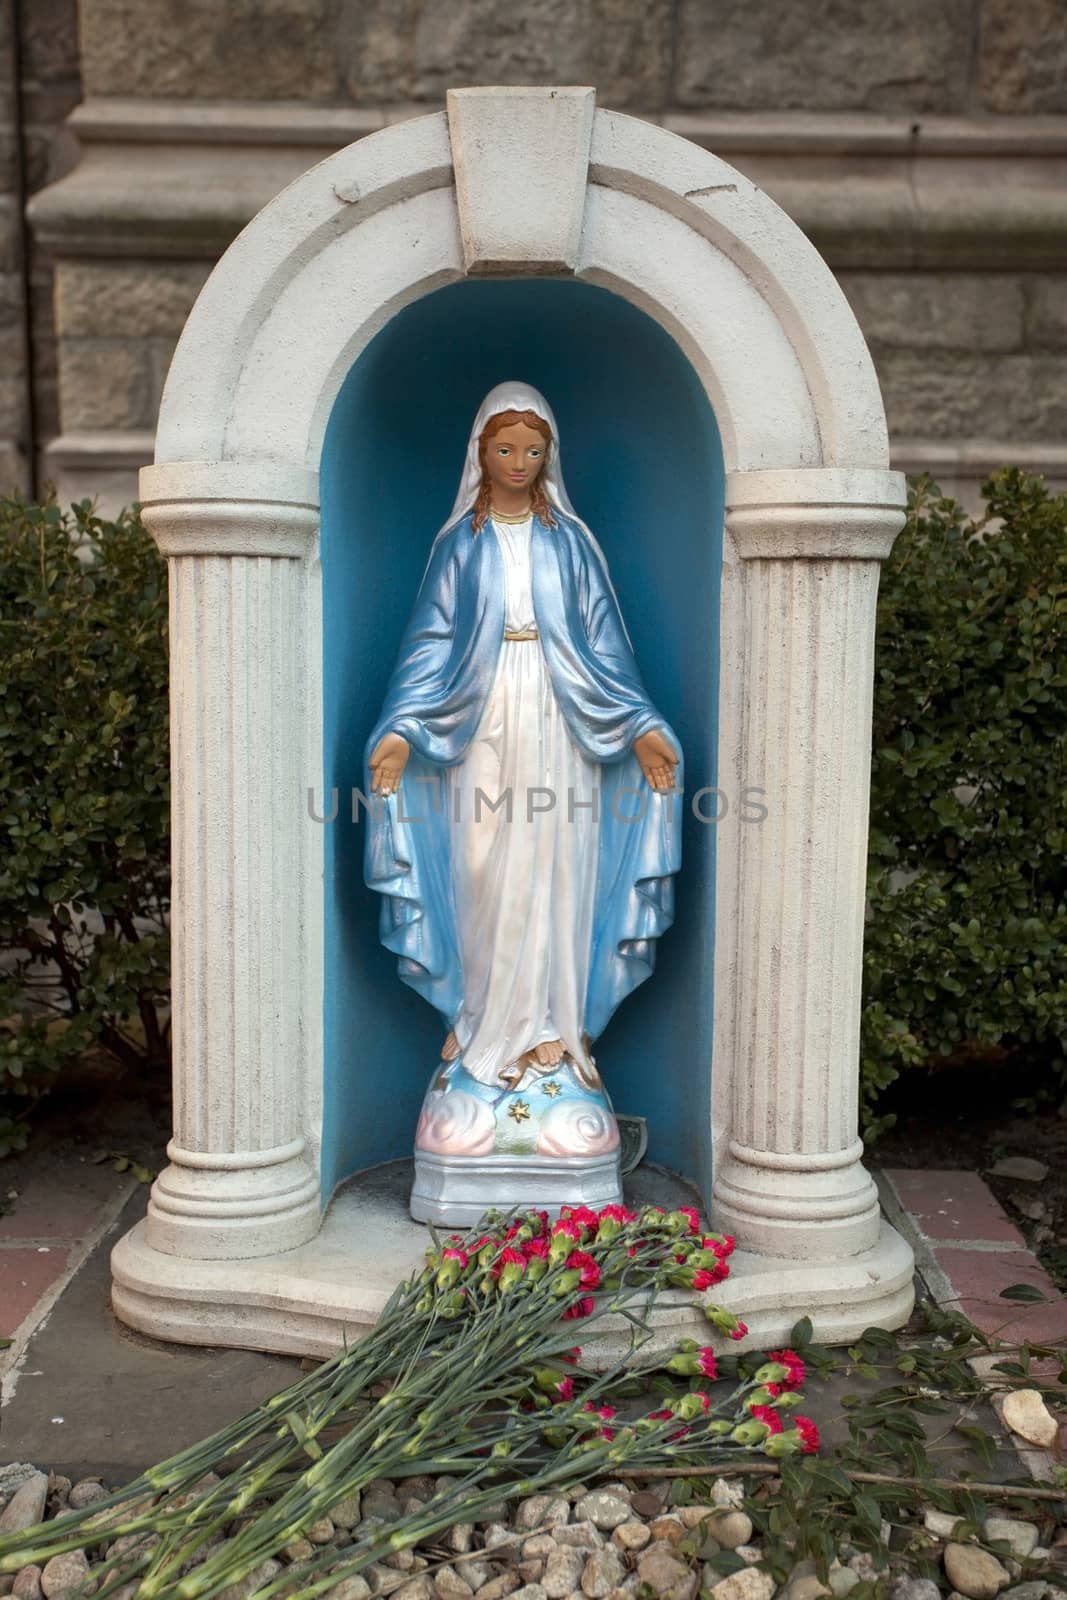 Sculpture of Virgin Mary near the temple.